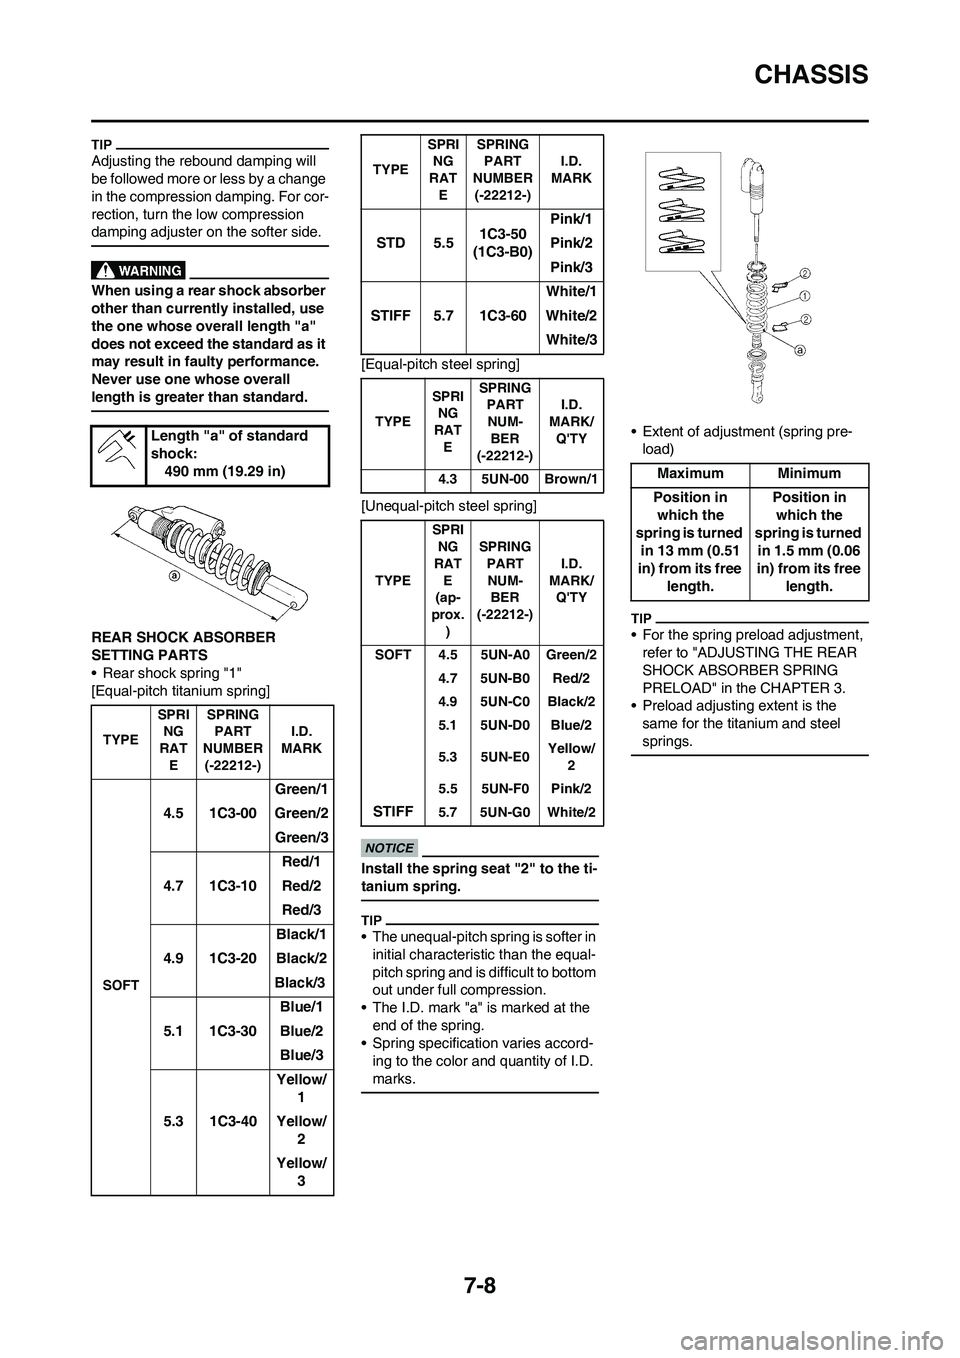 YAMAHA YZ450F 2009  Owners Manual 7-8
CHASSIS
Adjusting the rebound damping will 
be followed more or less by a change 
in the compression damping. For cor-
rection, turn the low compression 
damping adjuster on the softer side.
When 